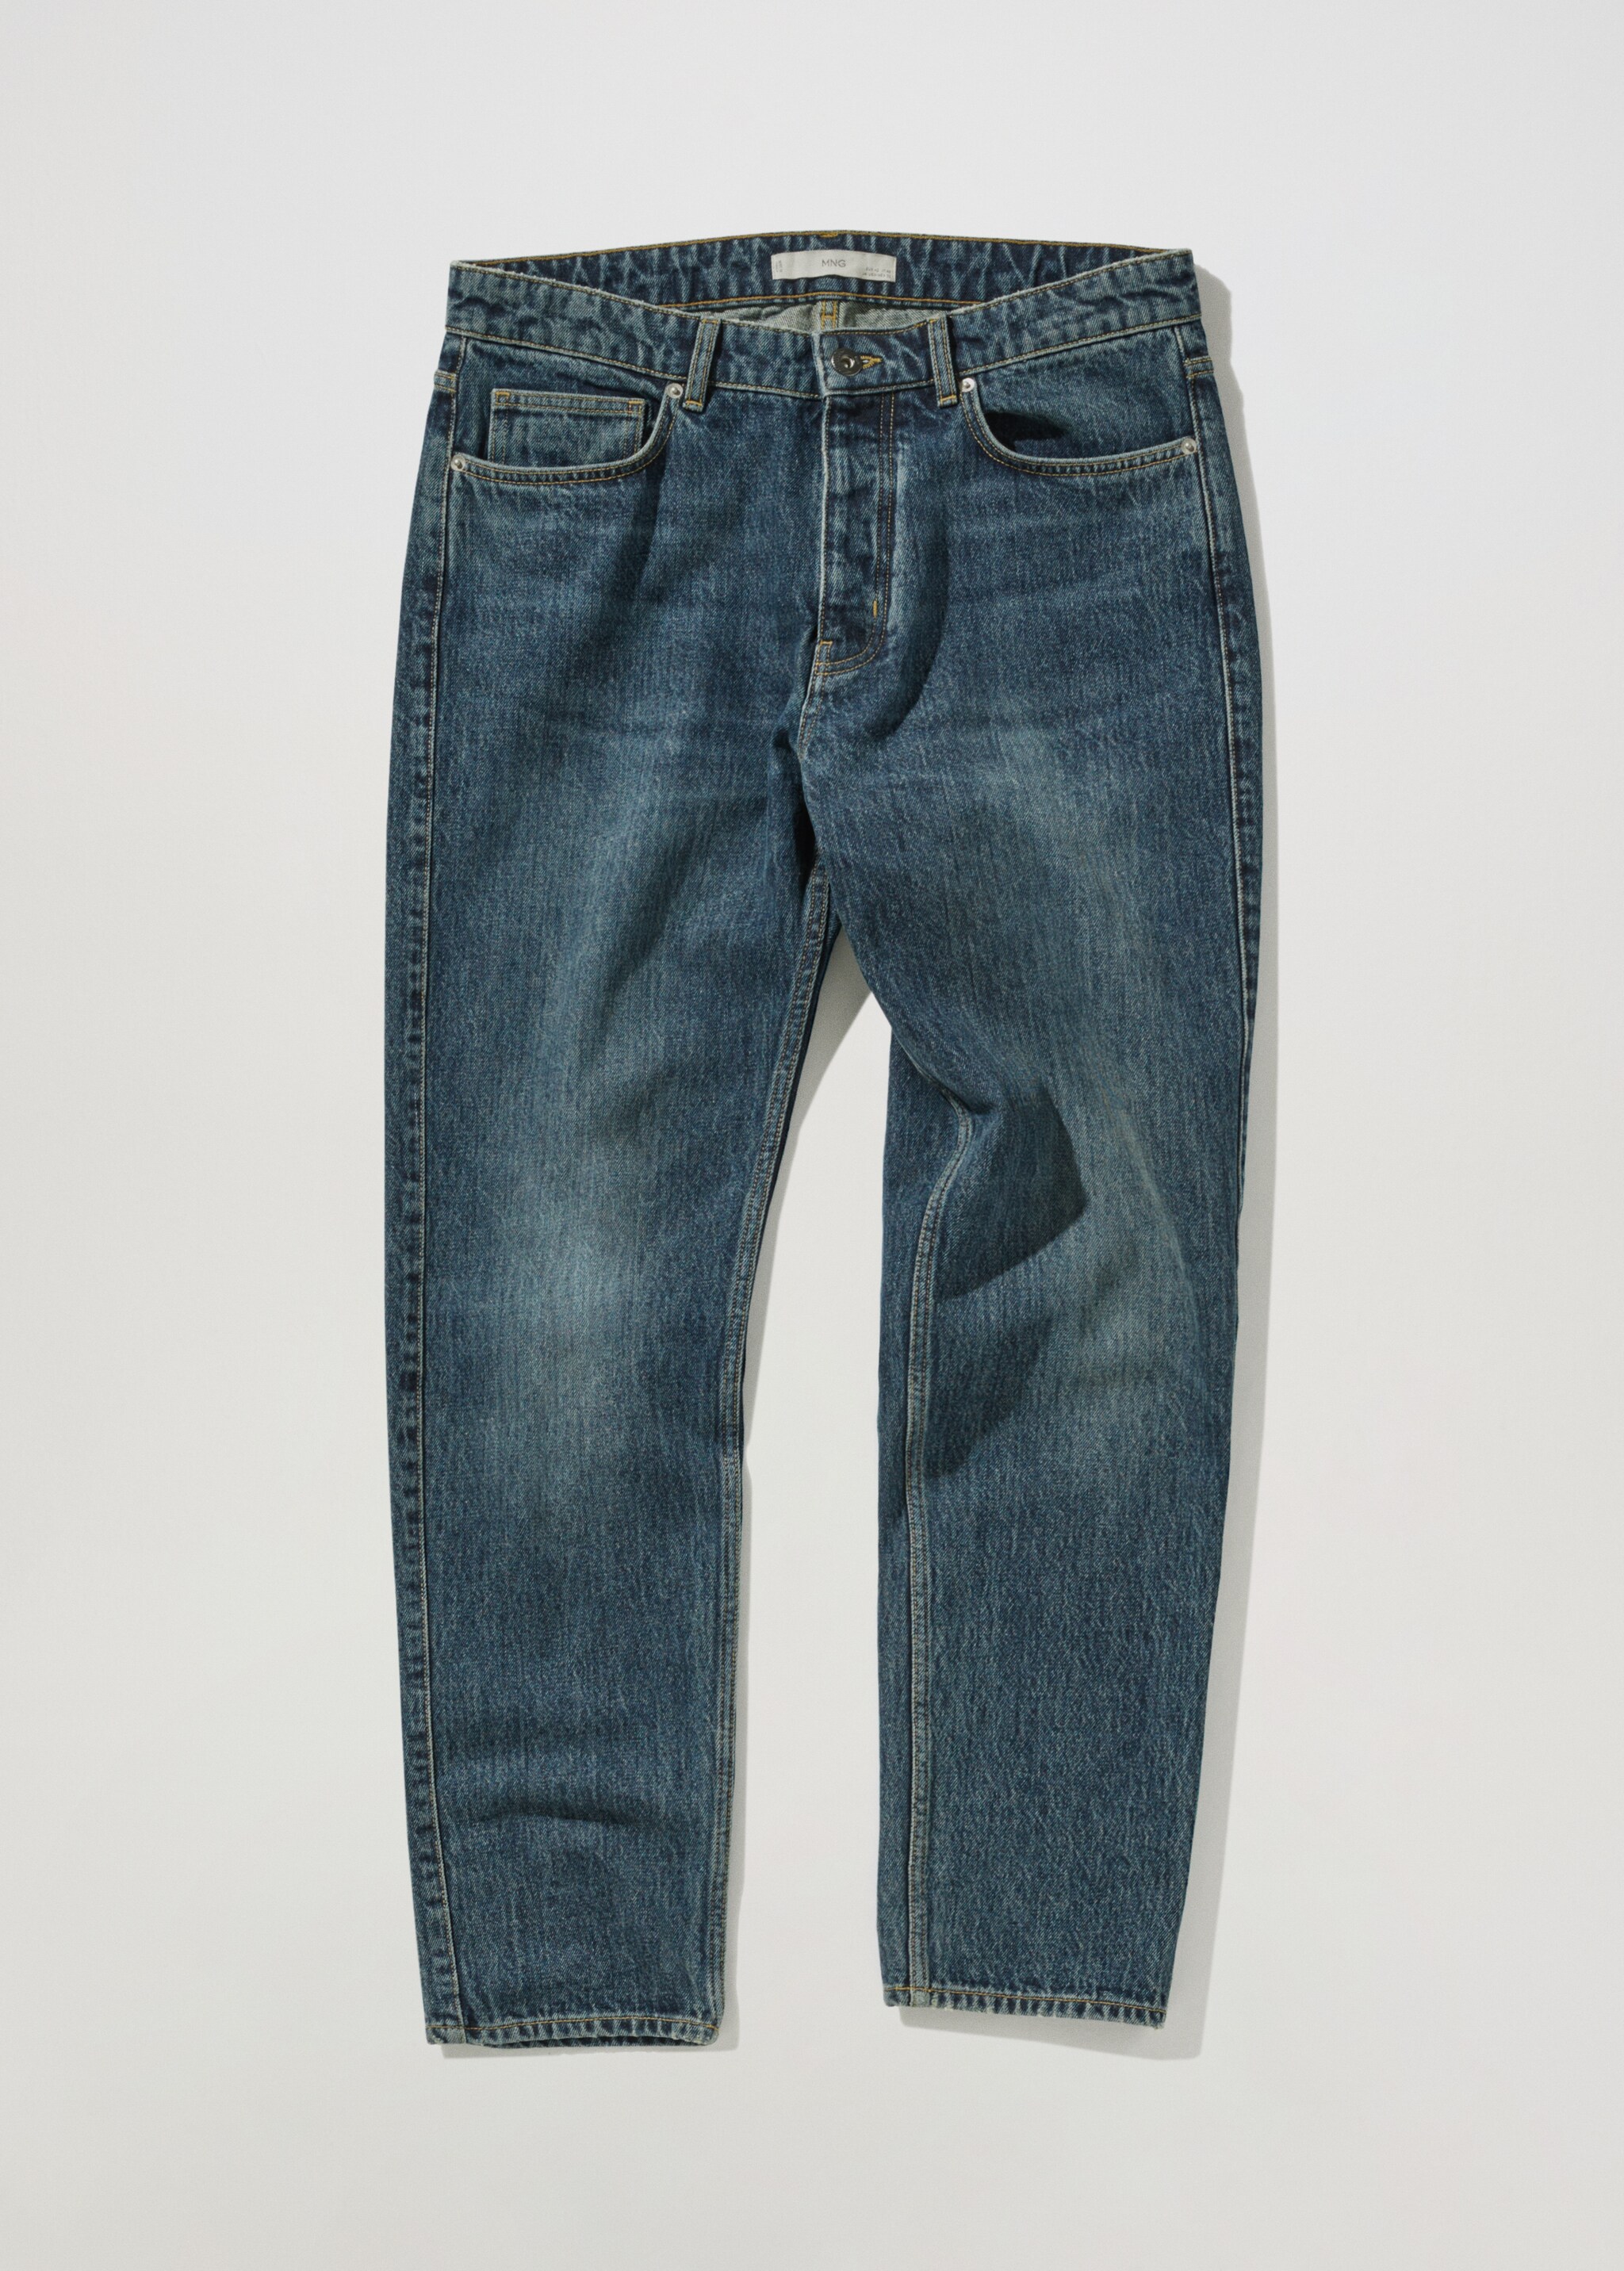 Vintage straight-fit jeans - Article without model